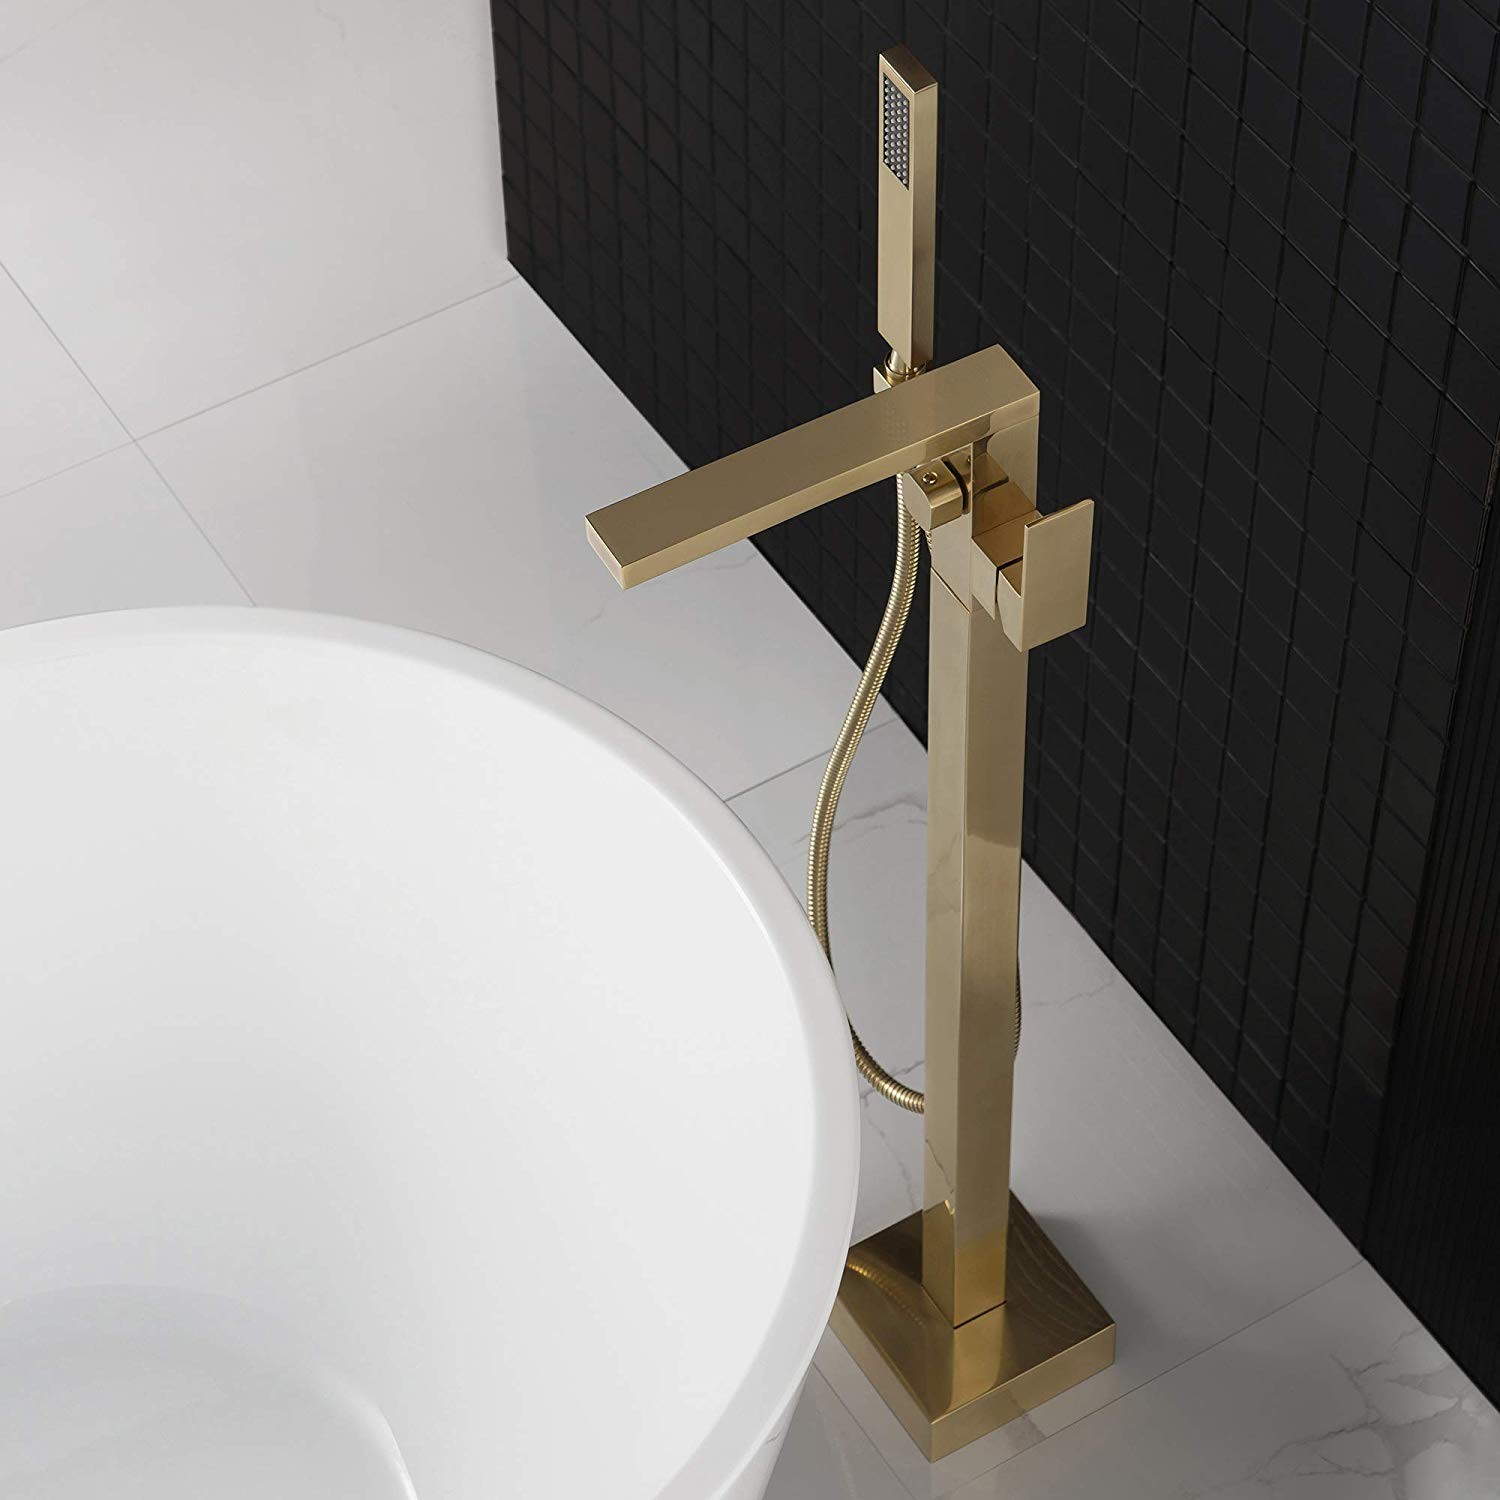  WOODBRIDGE F0008BG Contemporary Single Handle Floor Mount Freestanding Tub Filler Faucet with Hand shower in Brushed Gold Finish._10003